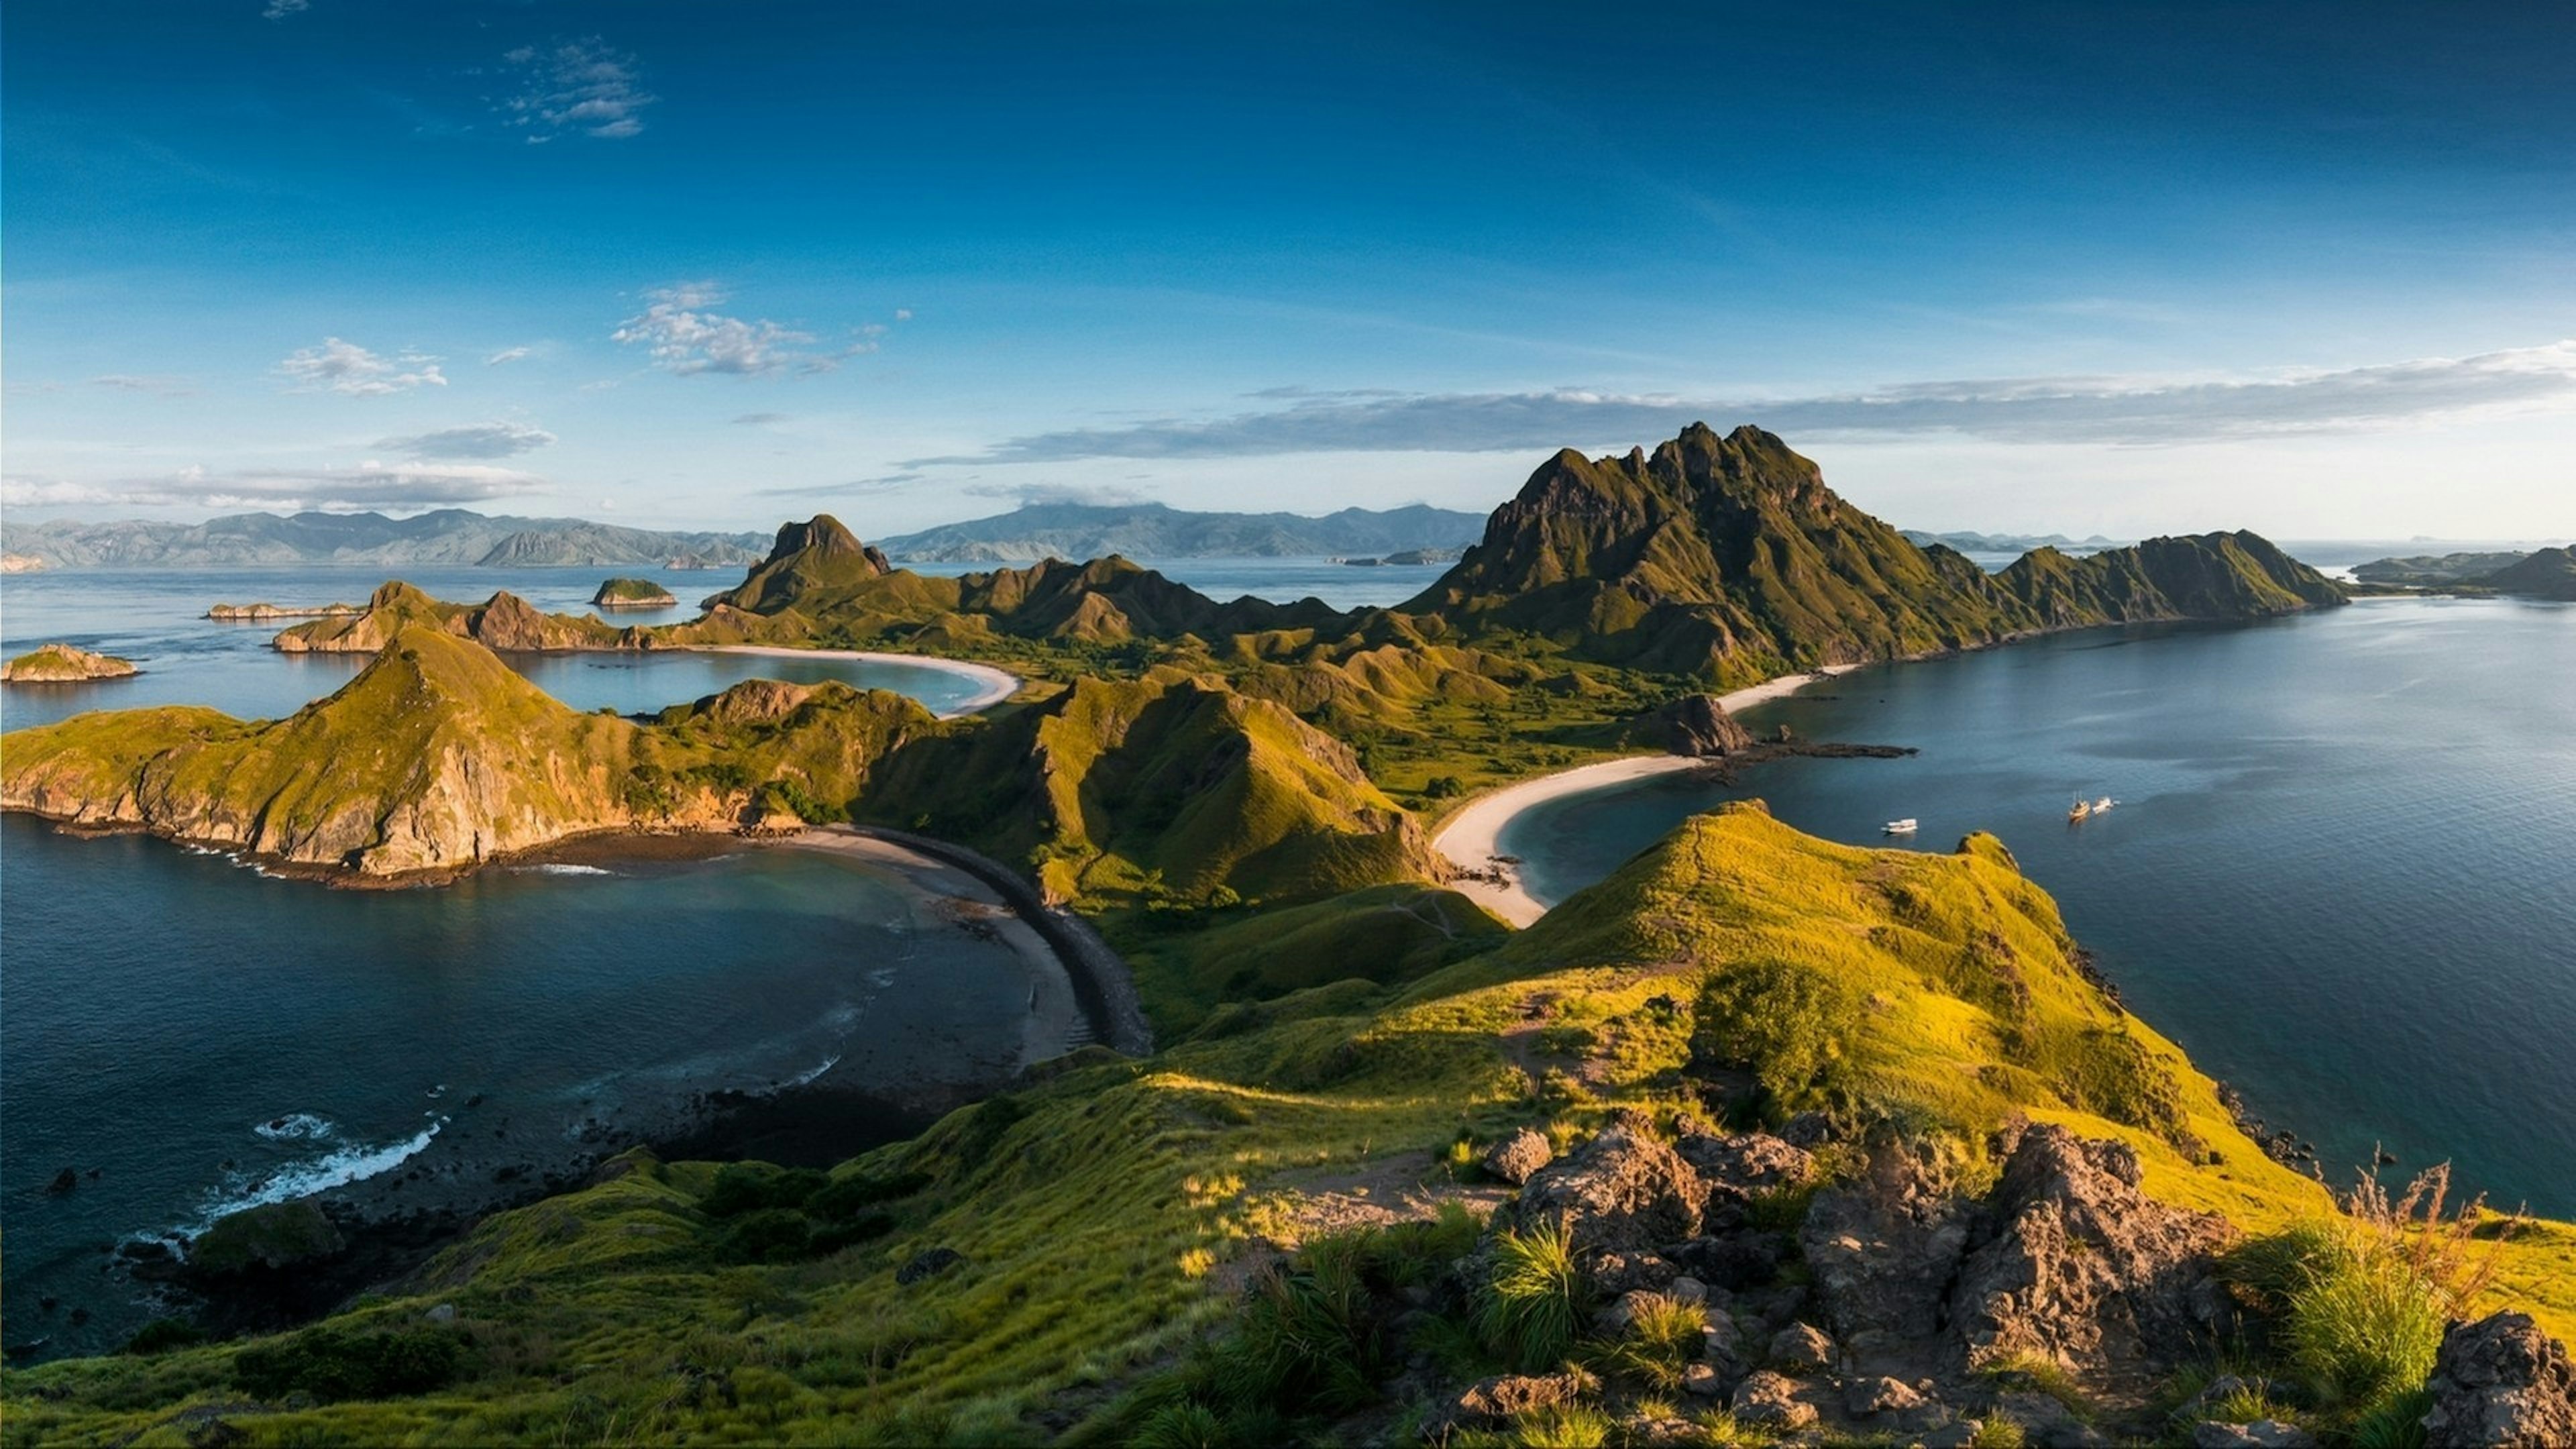 Top view of 'Padar Island' in a morning from Komodo Island